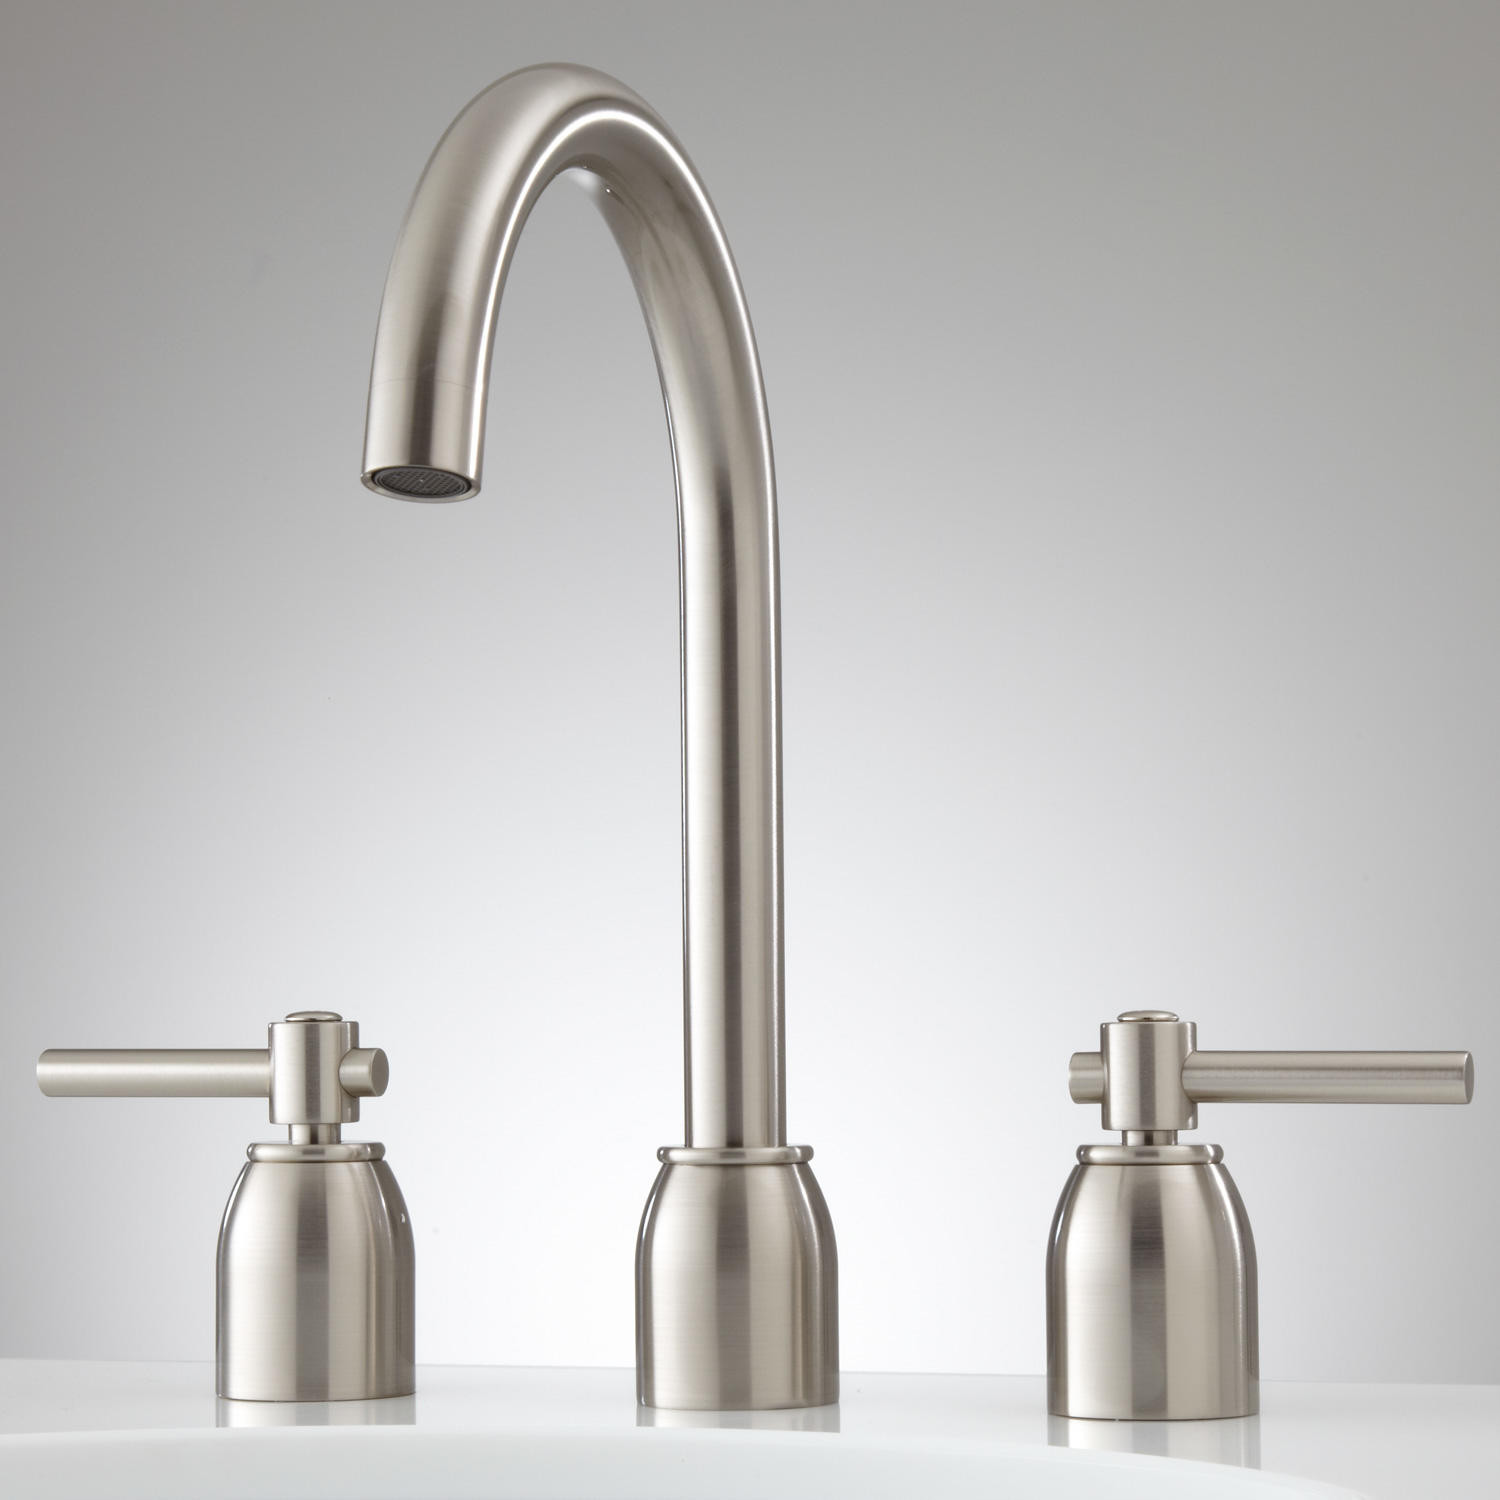 Bathroom Sinks And Faucets
 Cortland Widespread Bathroom Faucet Modern Faucets